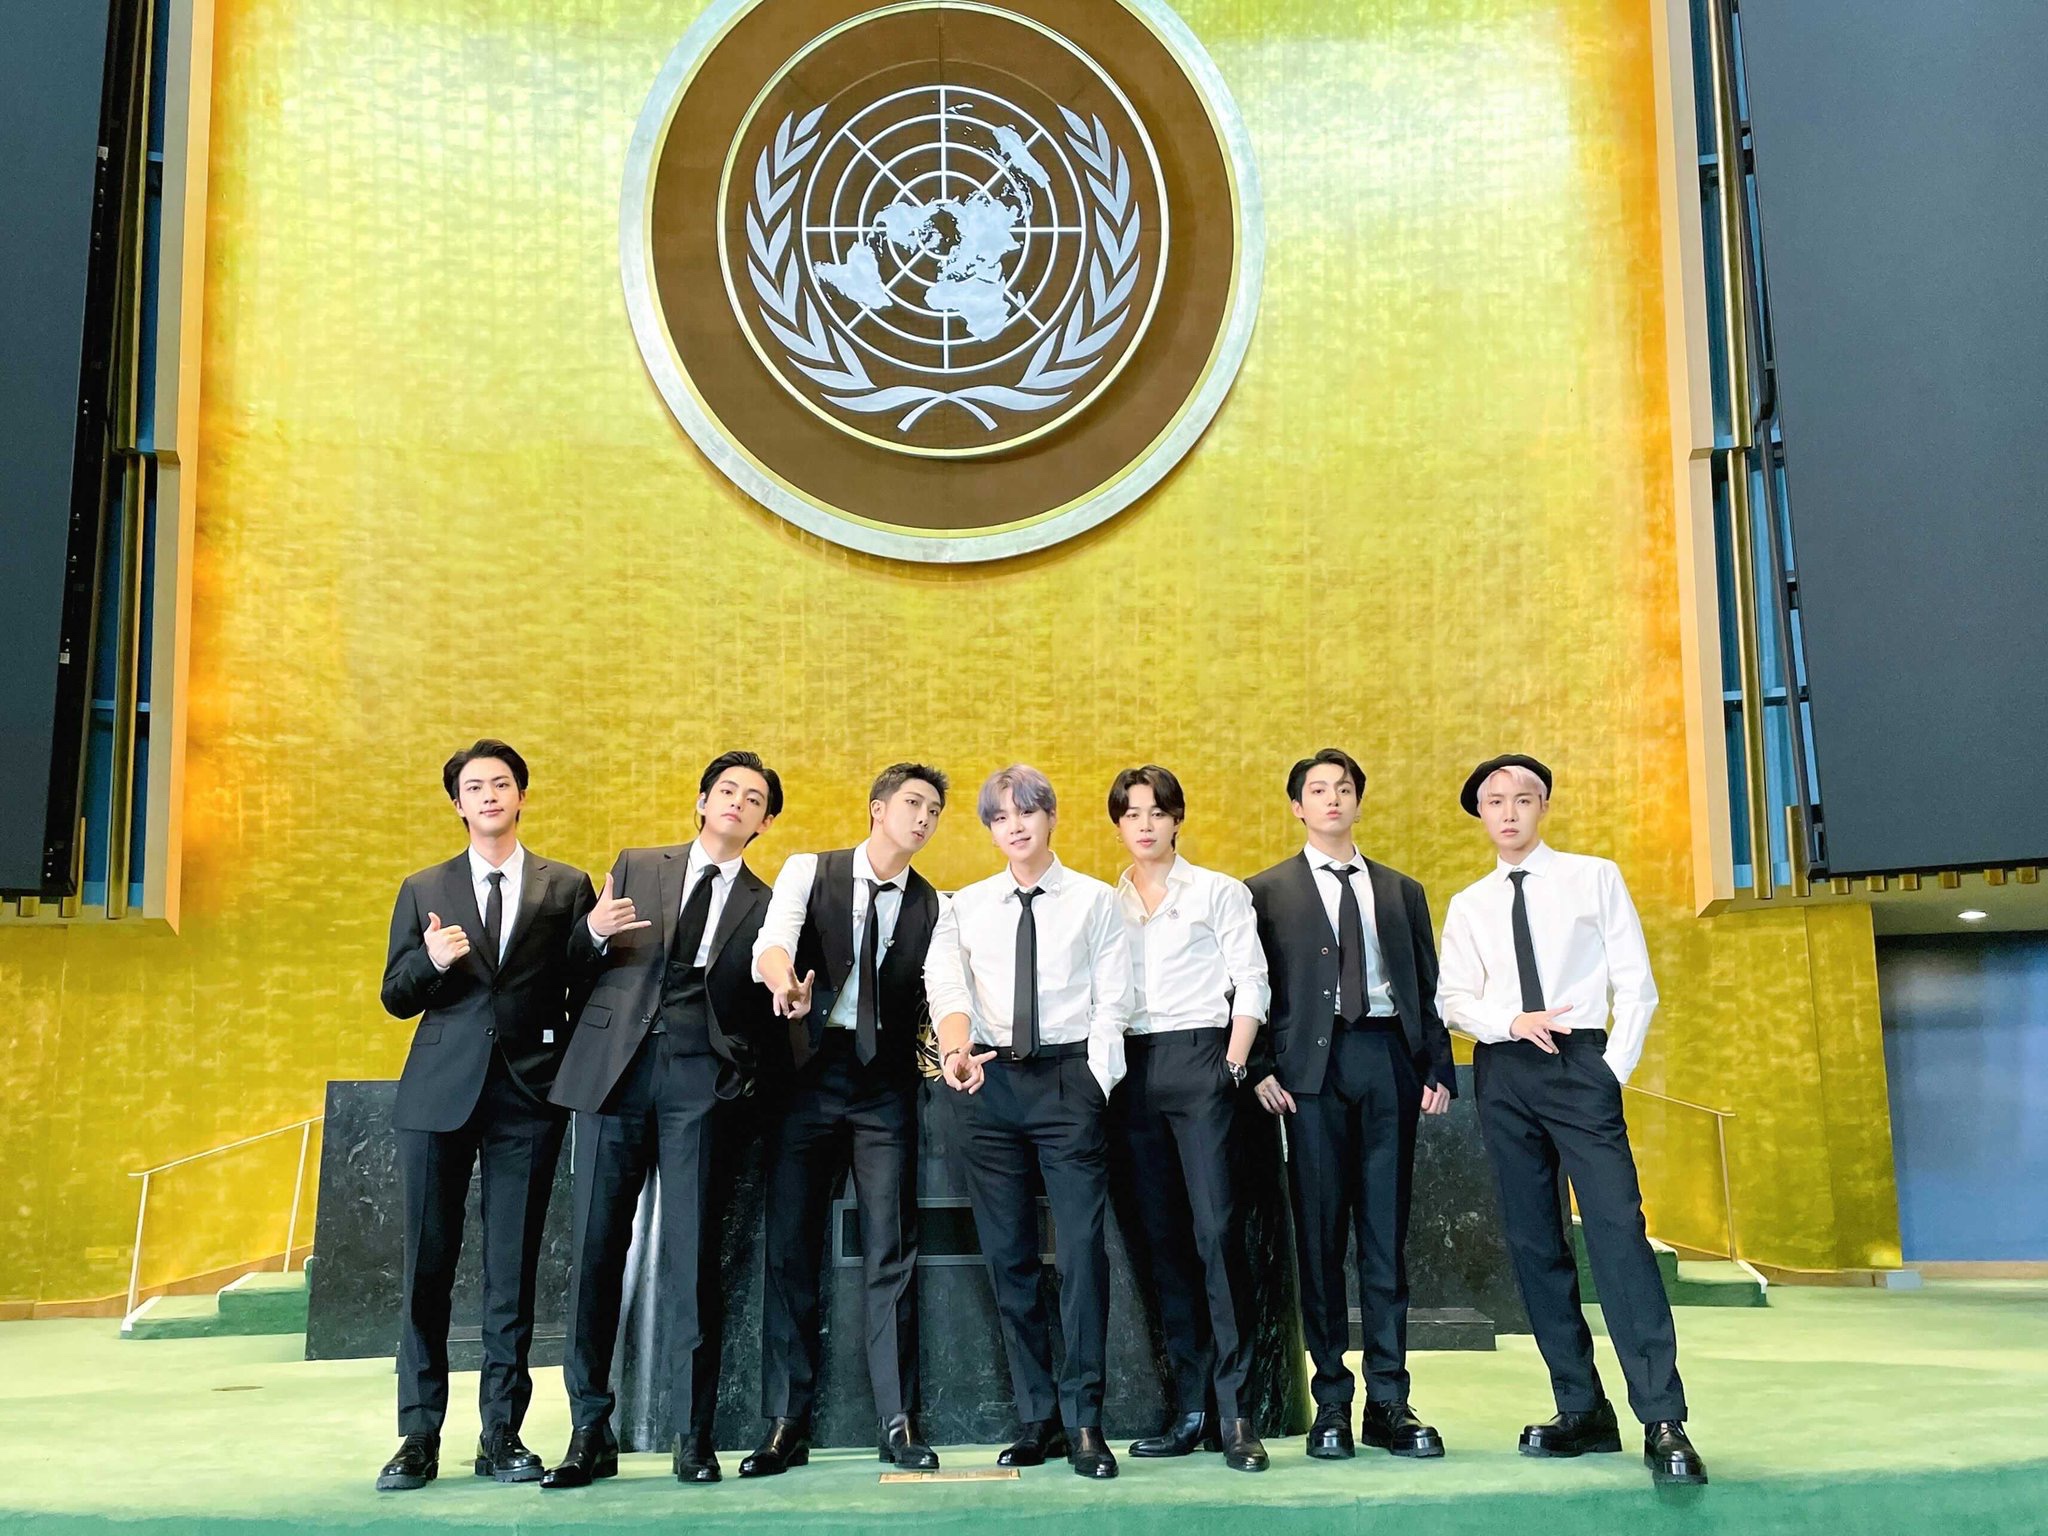 “…every choice we make is the beginning of change” — BTS Shares a Powerful Message of Hope At The United Nations